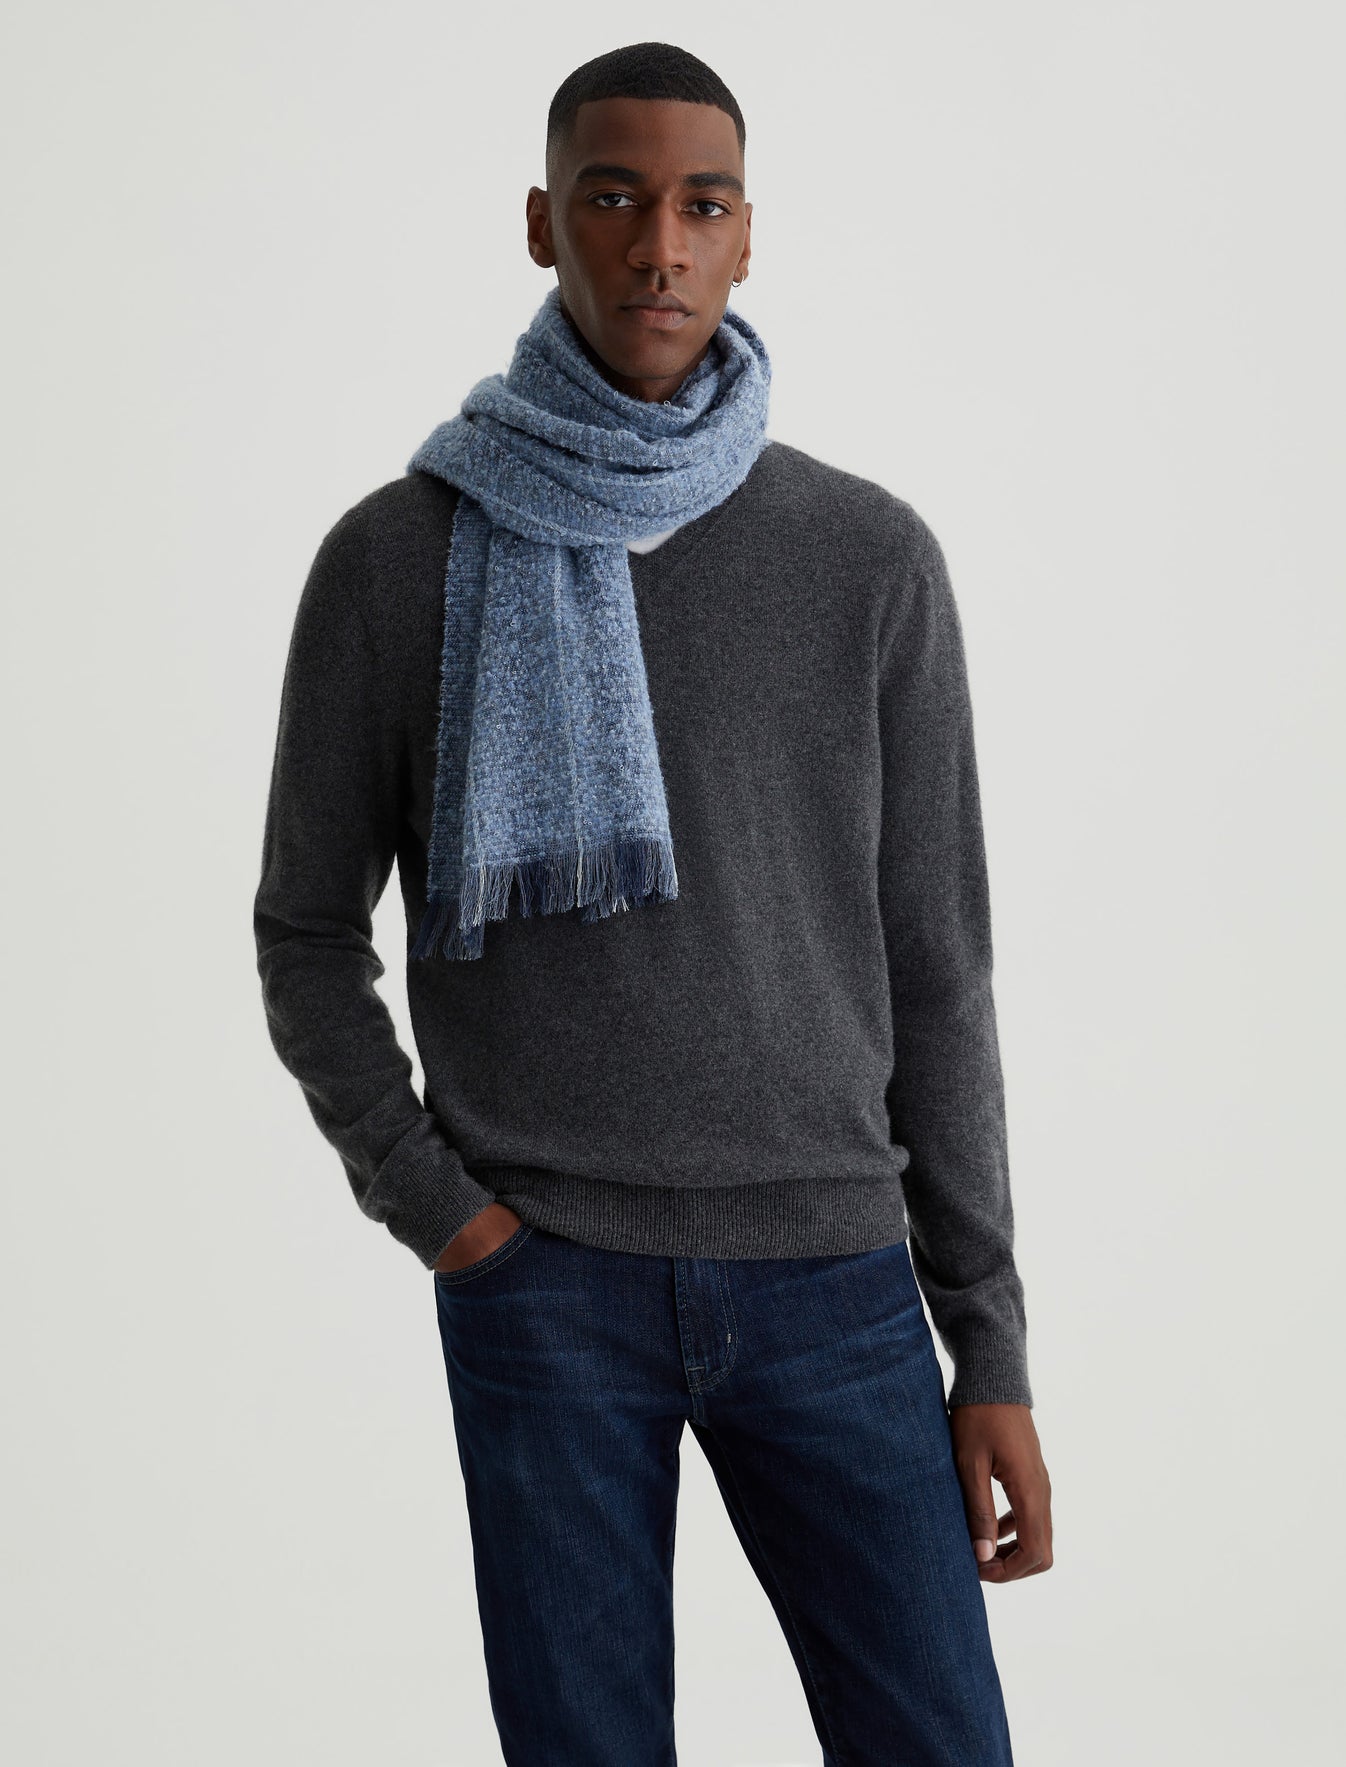 Stripe at Official Store Jeans Indigo Scarf Accessory AG Wool Arden